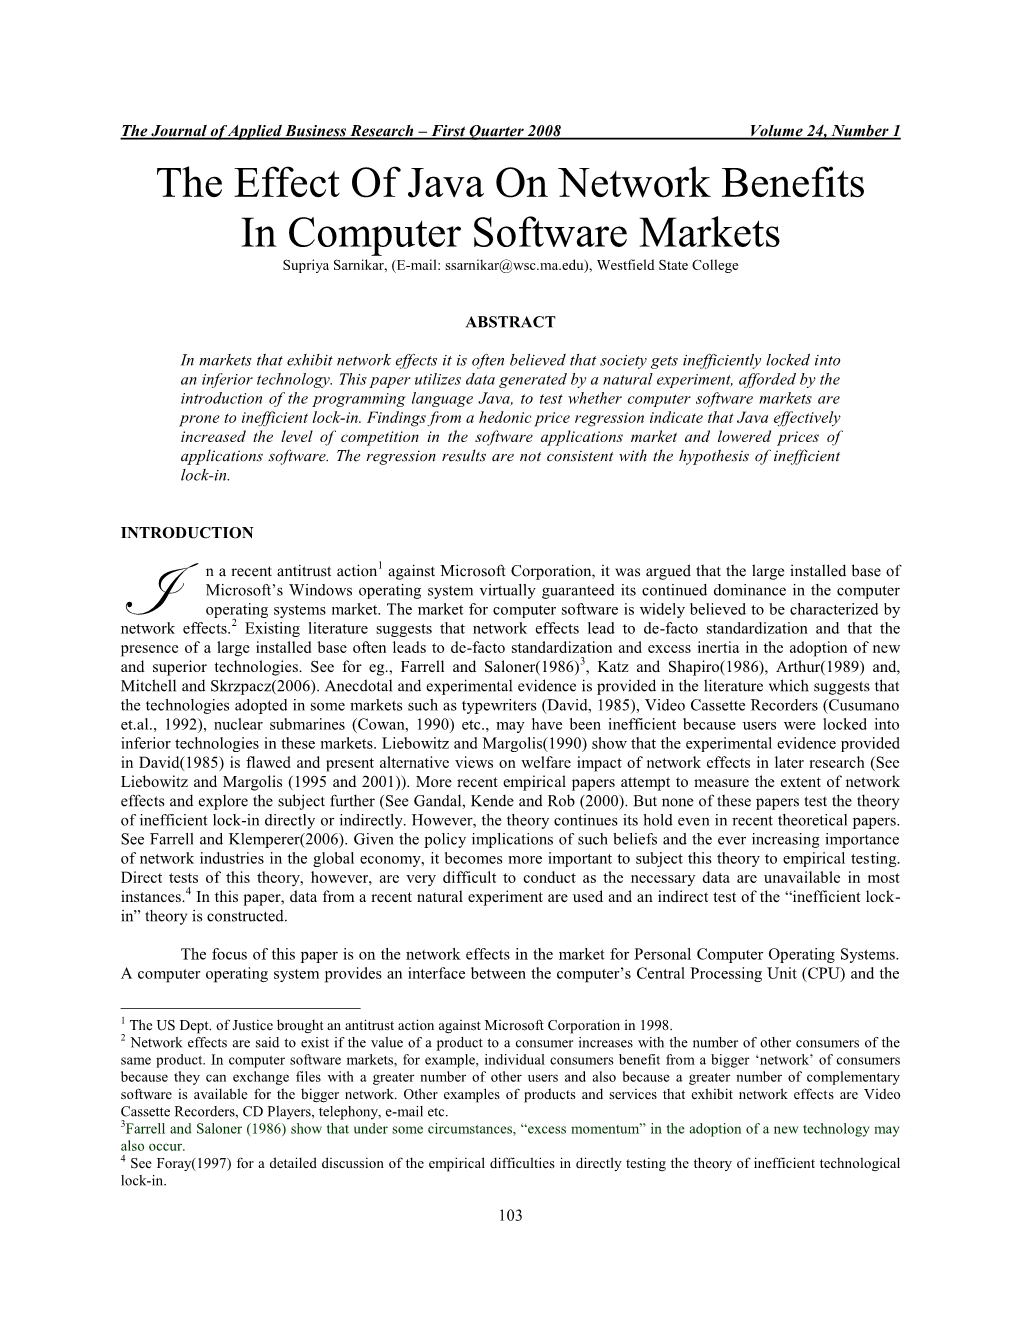 Network Externalities in the Computer Operating Systems Market